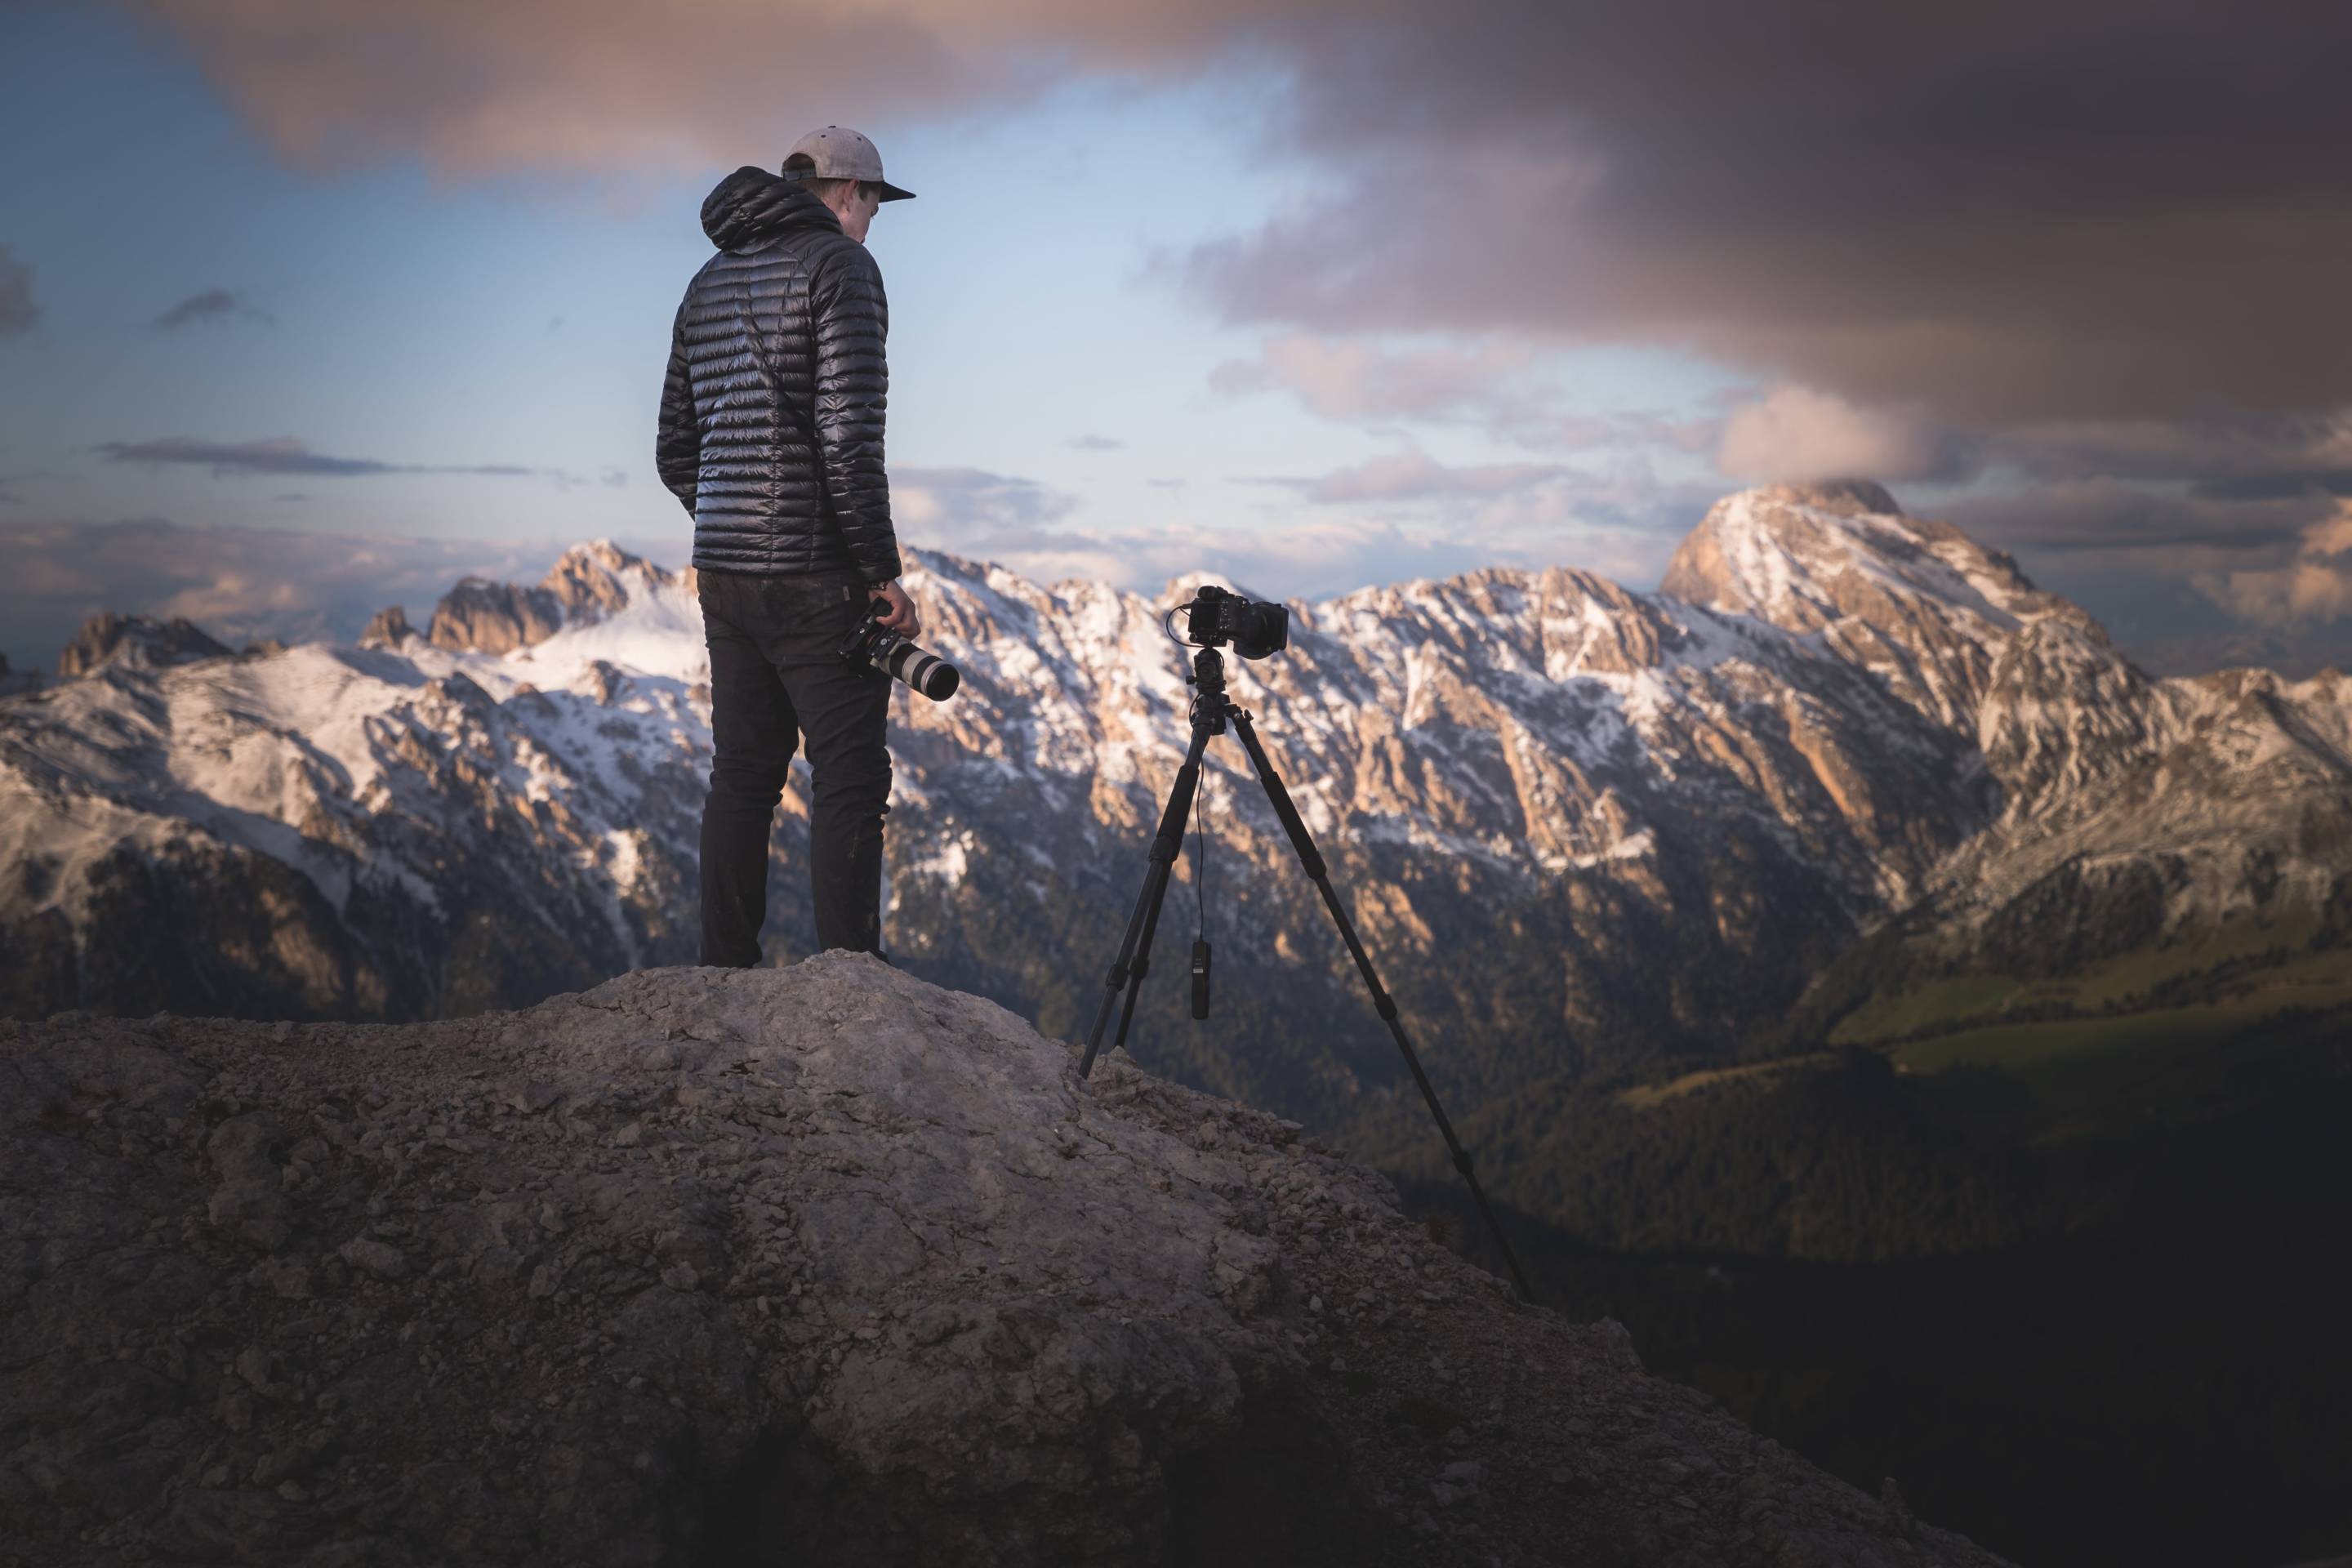 Behind the scenes of landscape photographer Andrew Studer in Italy Photo by Michael Shainblum